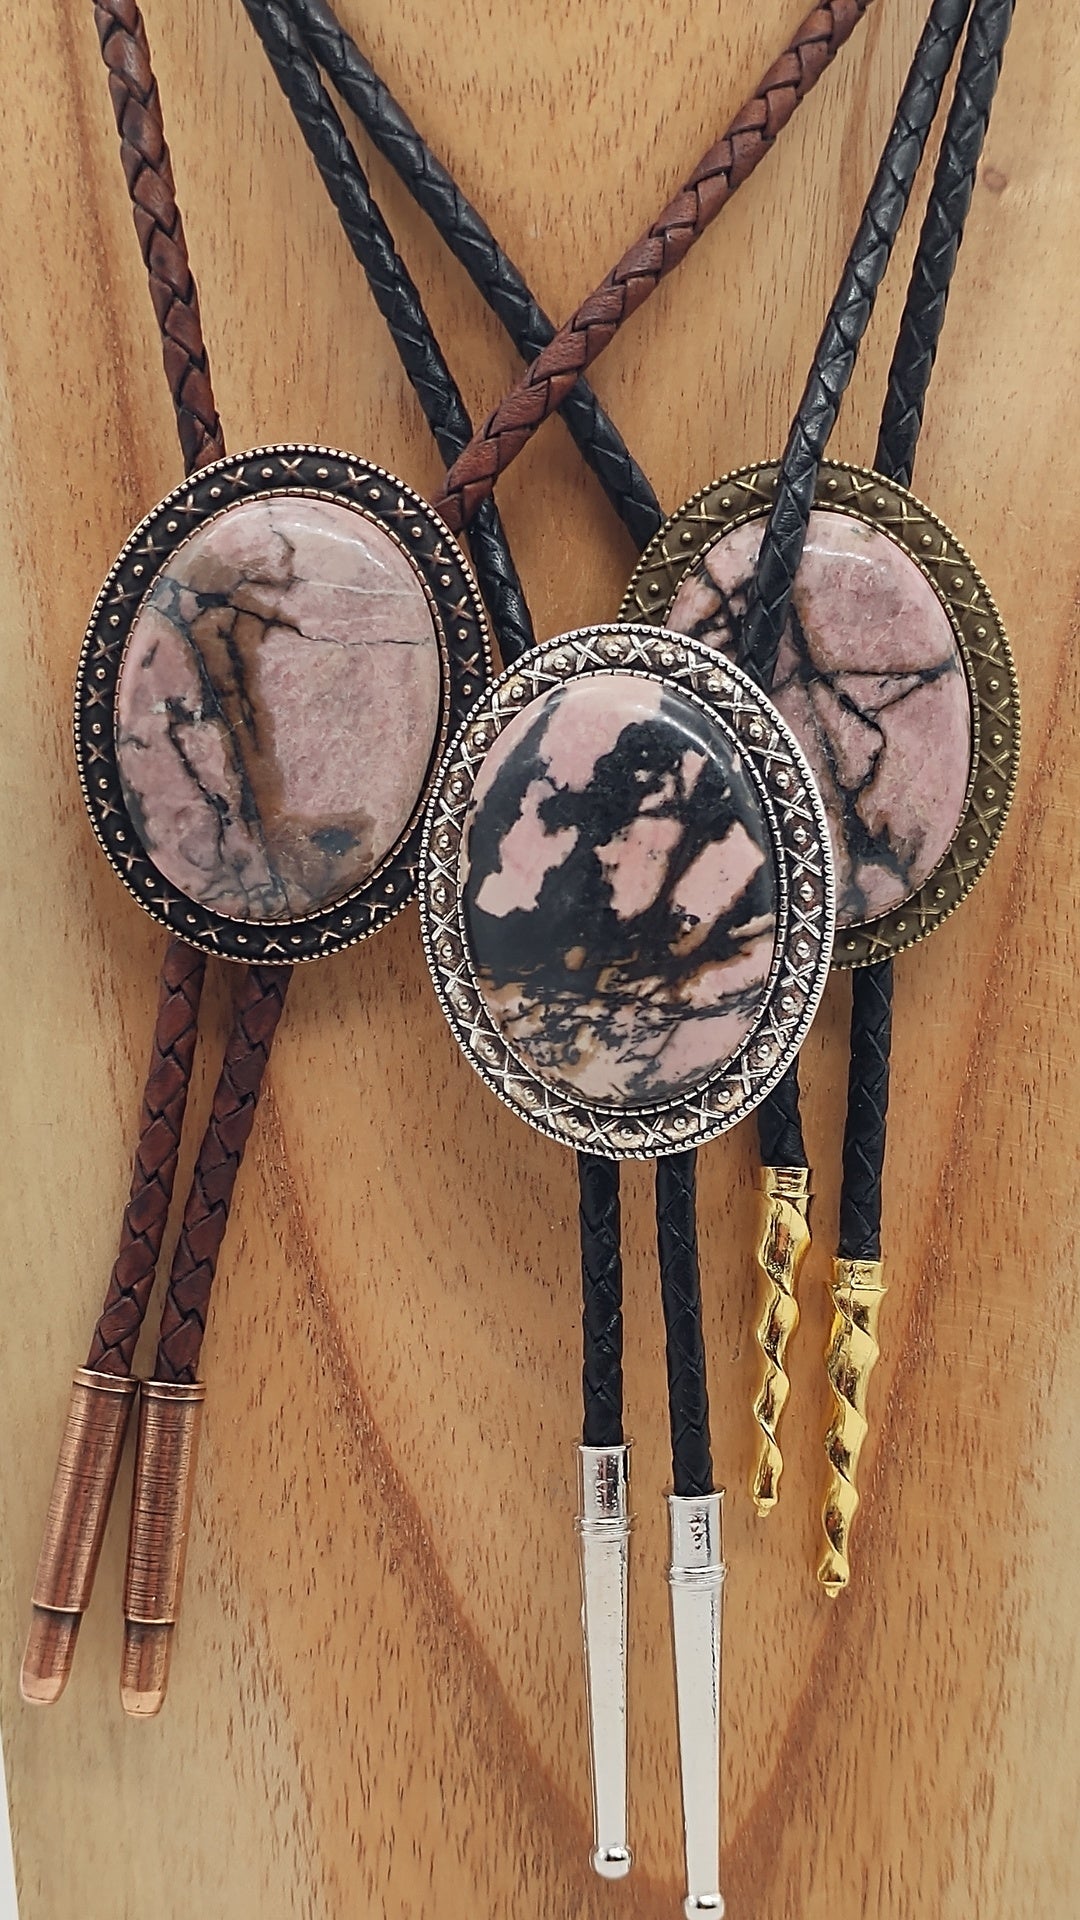 Yellowstone Bolo Tie with Rhodonite Stone in Gold, Silver or Copper Setting - Folks On The Edge